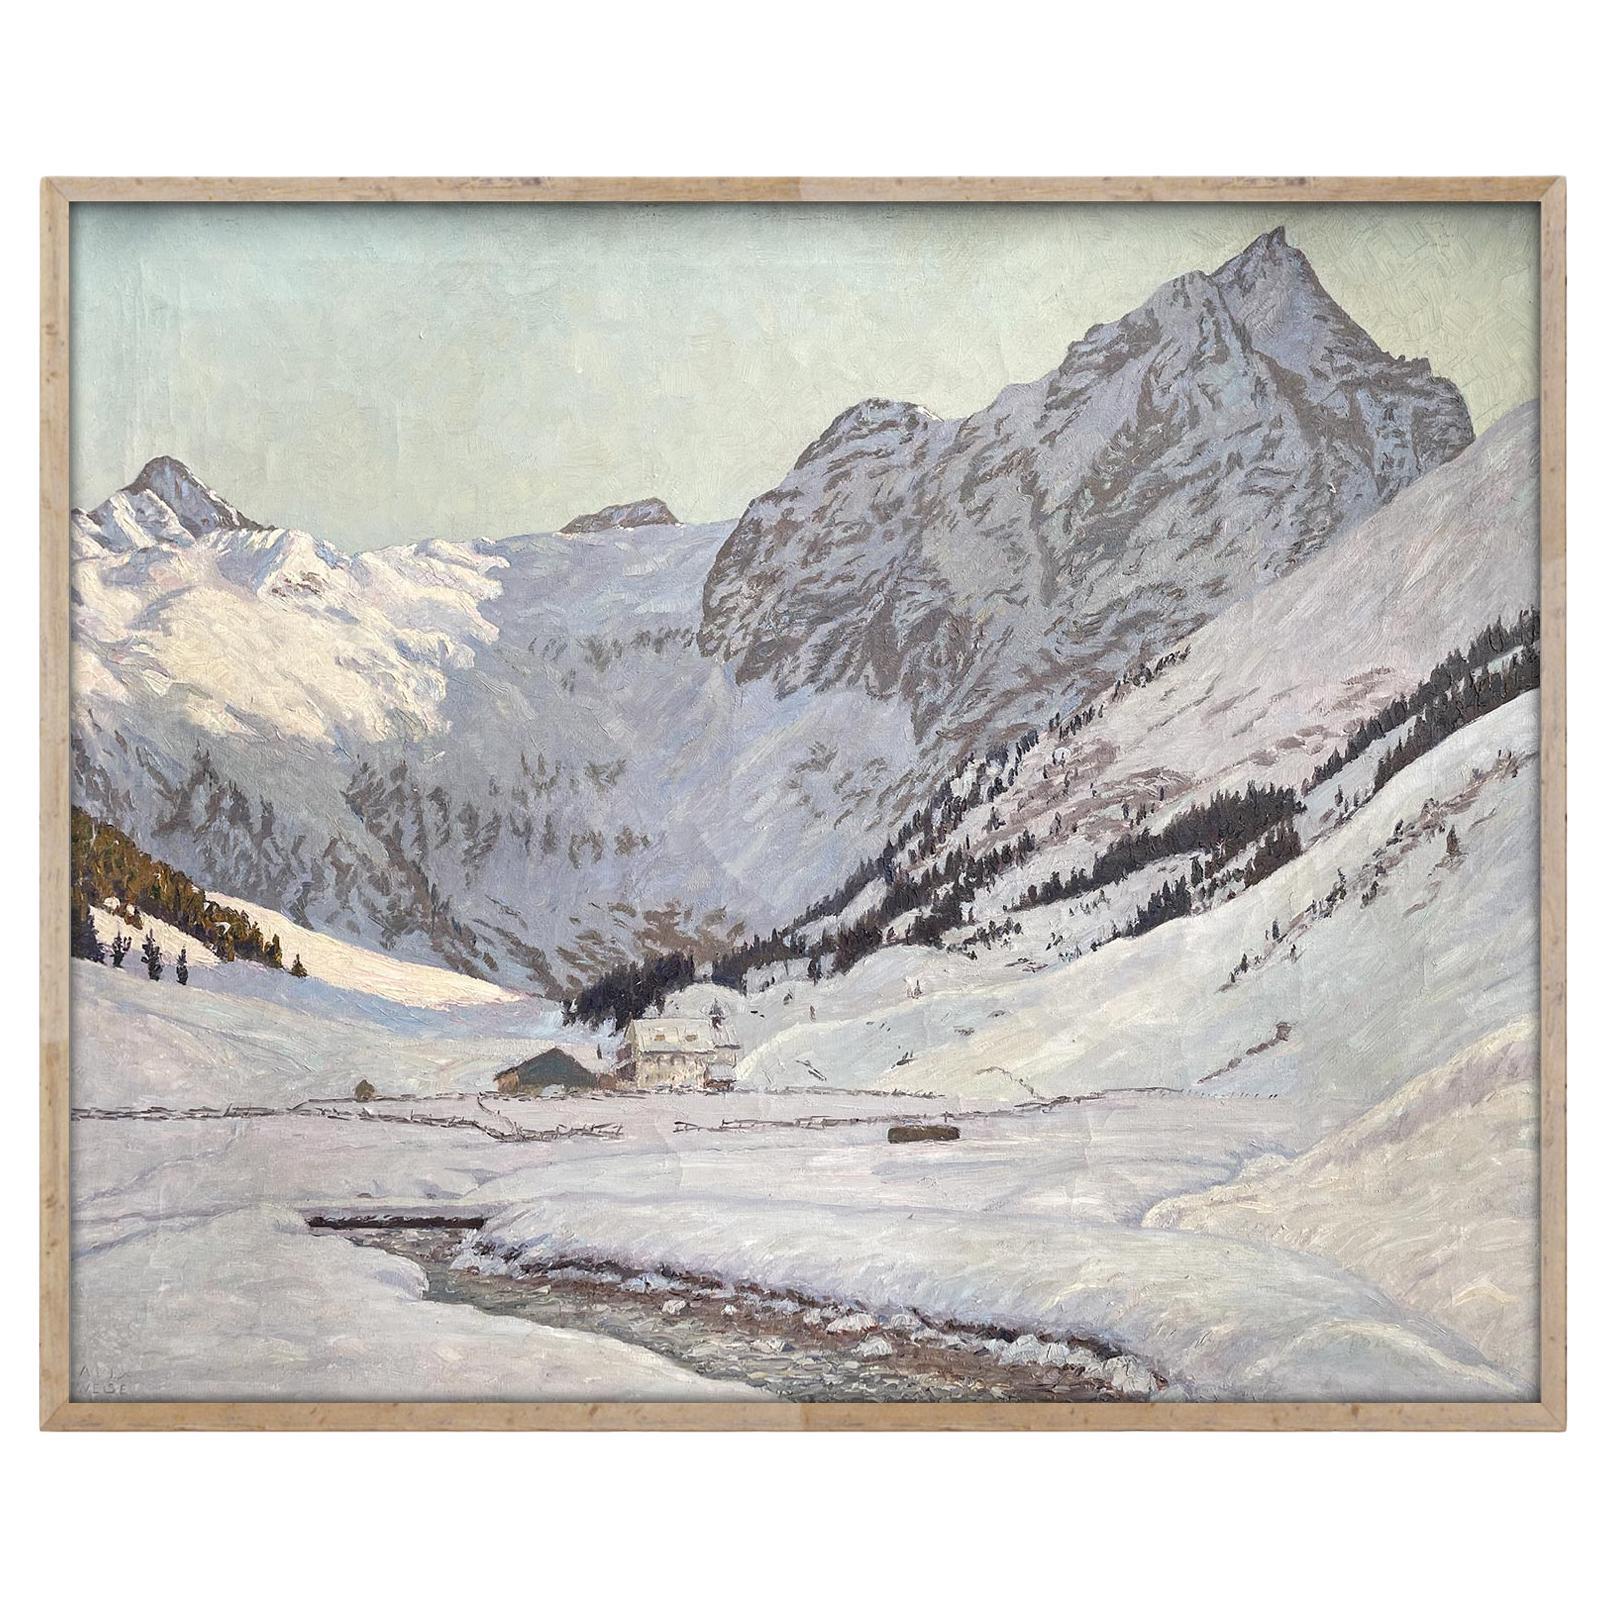 Snowy Landscape Oil On Canvas by Alex Weise - Dolomites 1930 For Sale